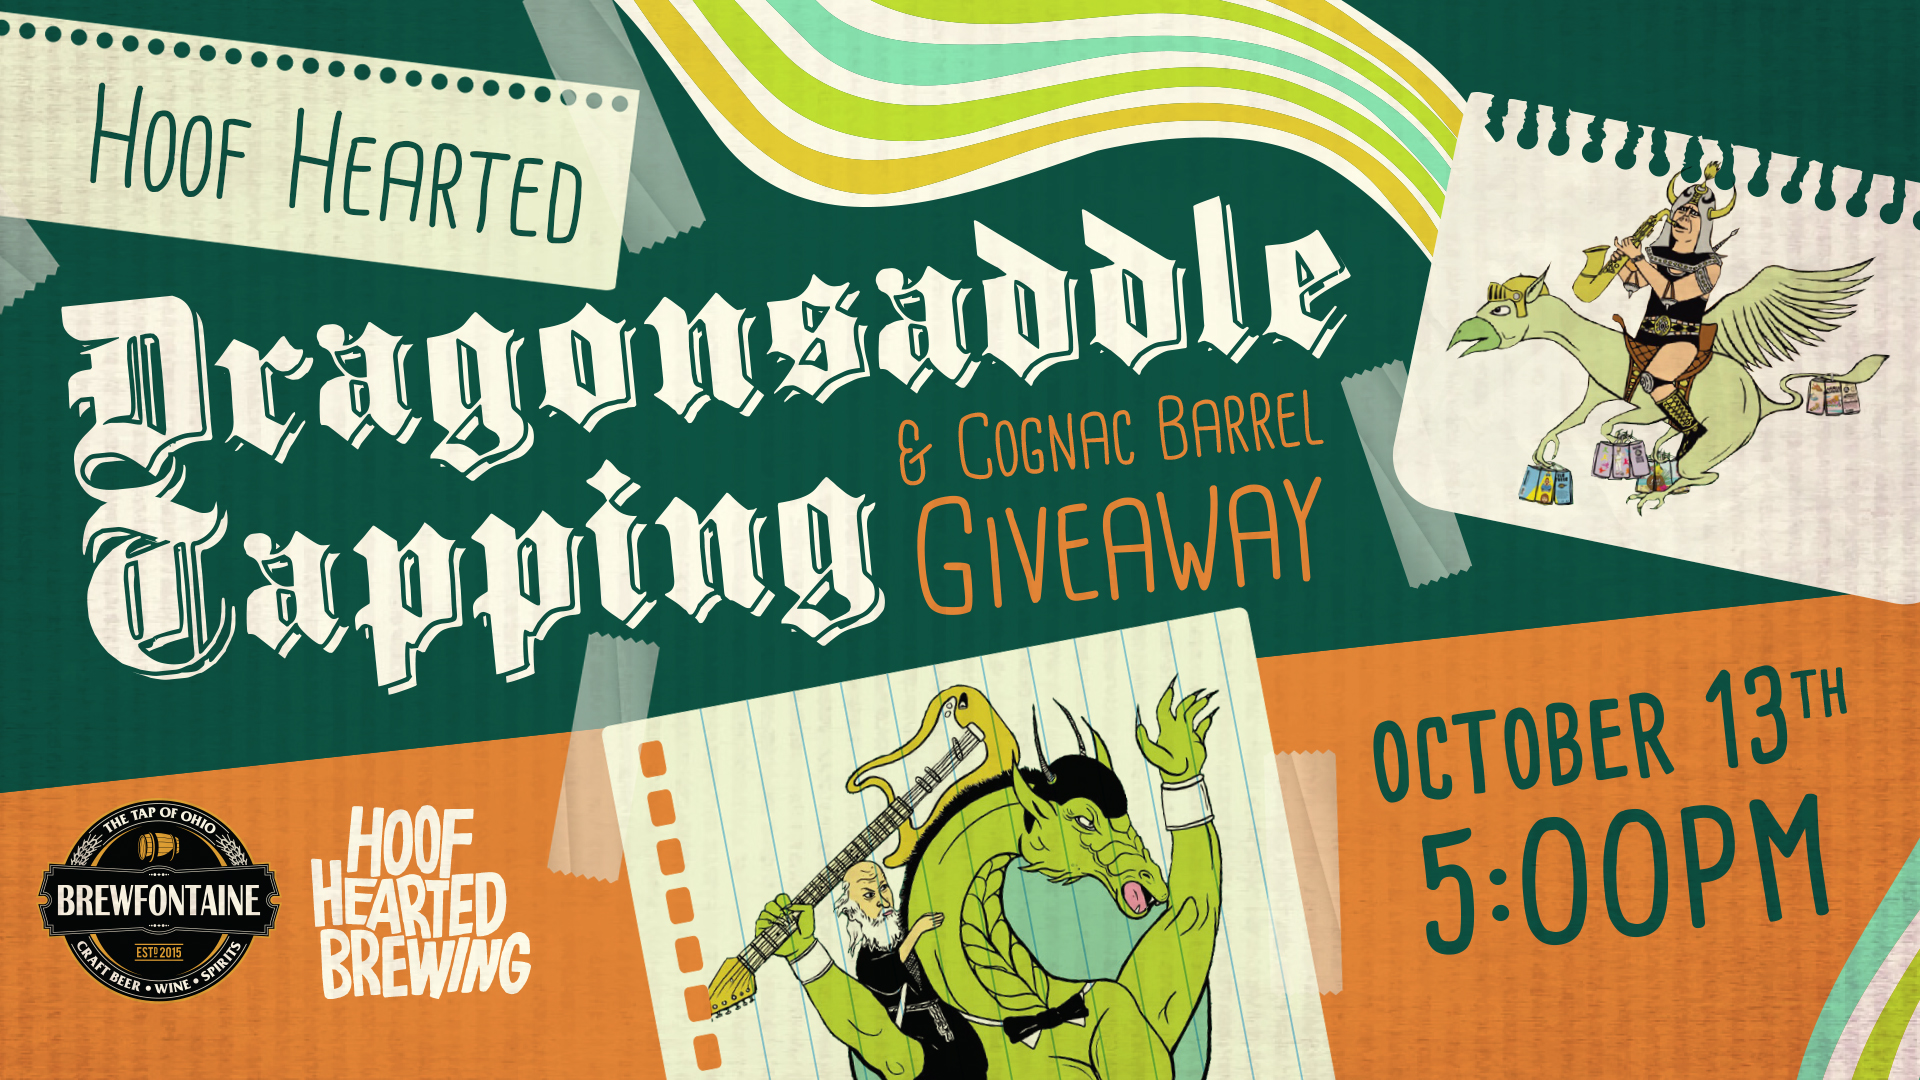 Hoof Hearted Dragon Saddle Tapping & Cognac Barrel Giveaway